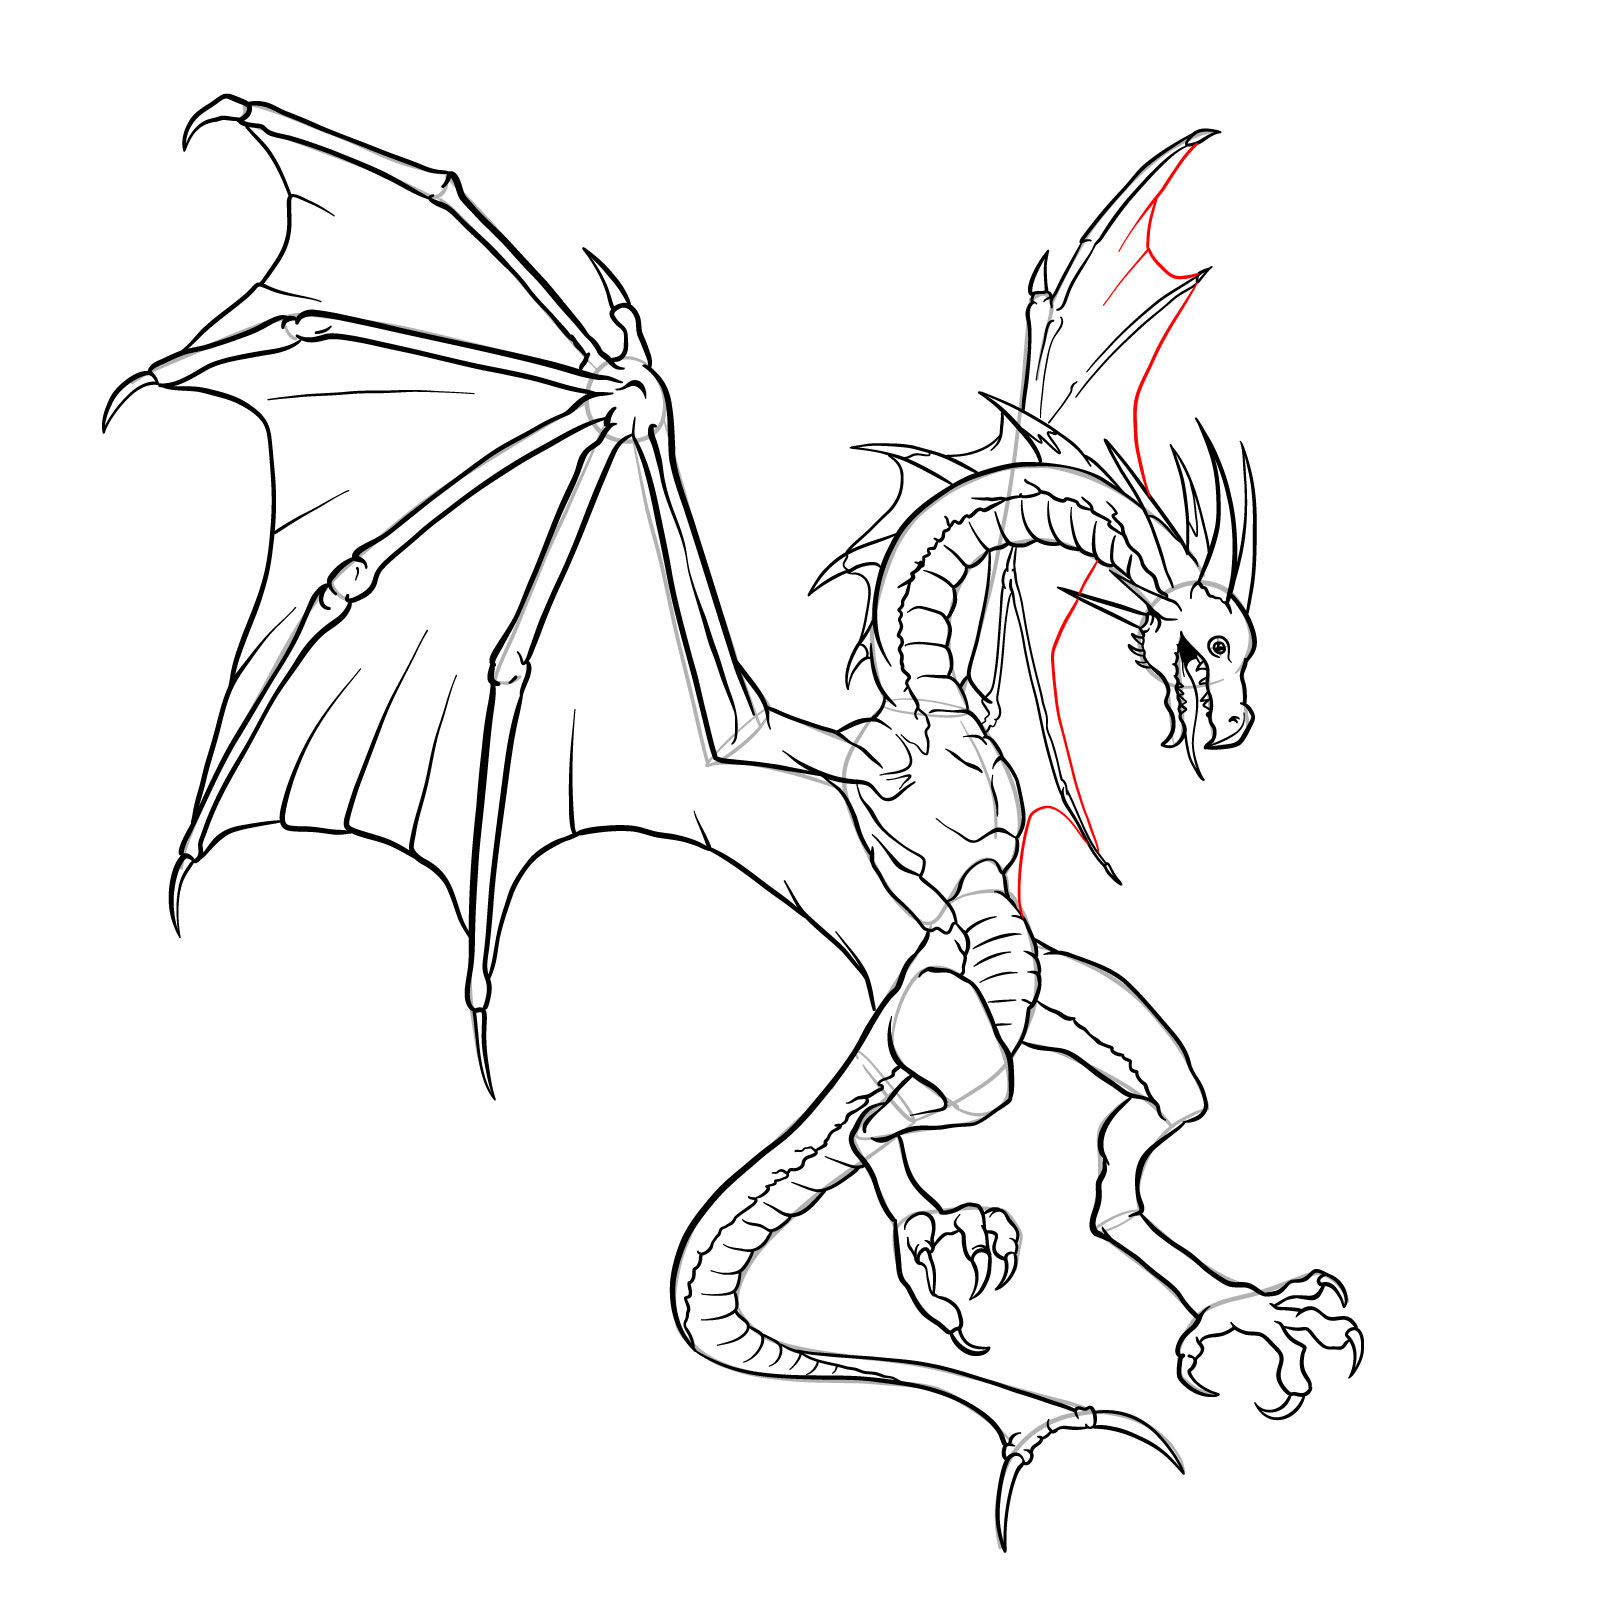 How to draw a Wyvern - step 47